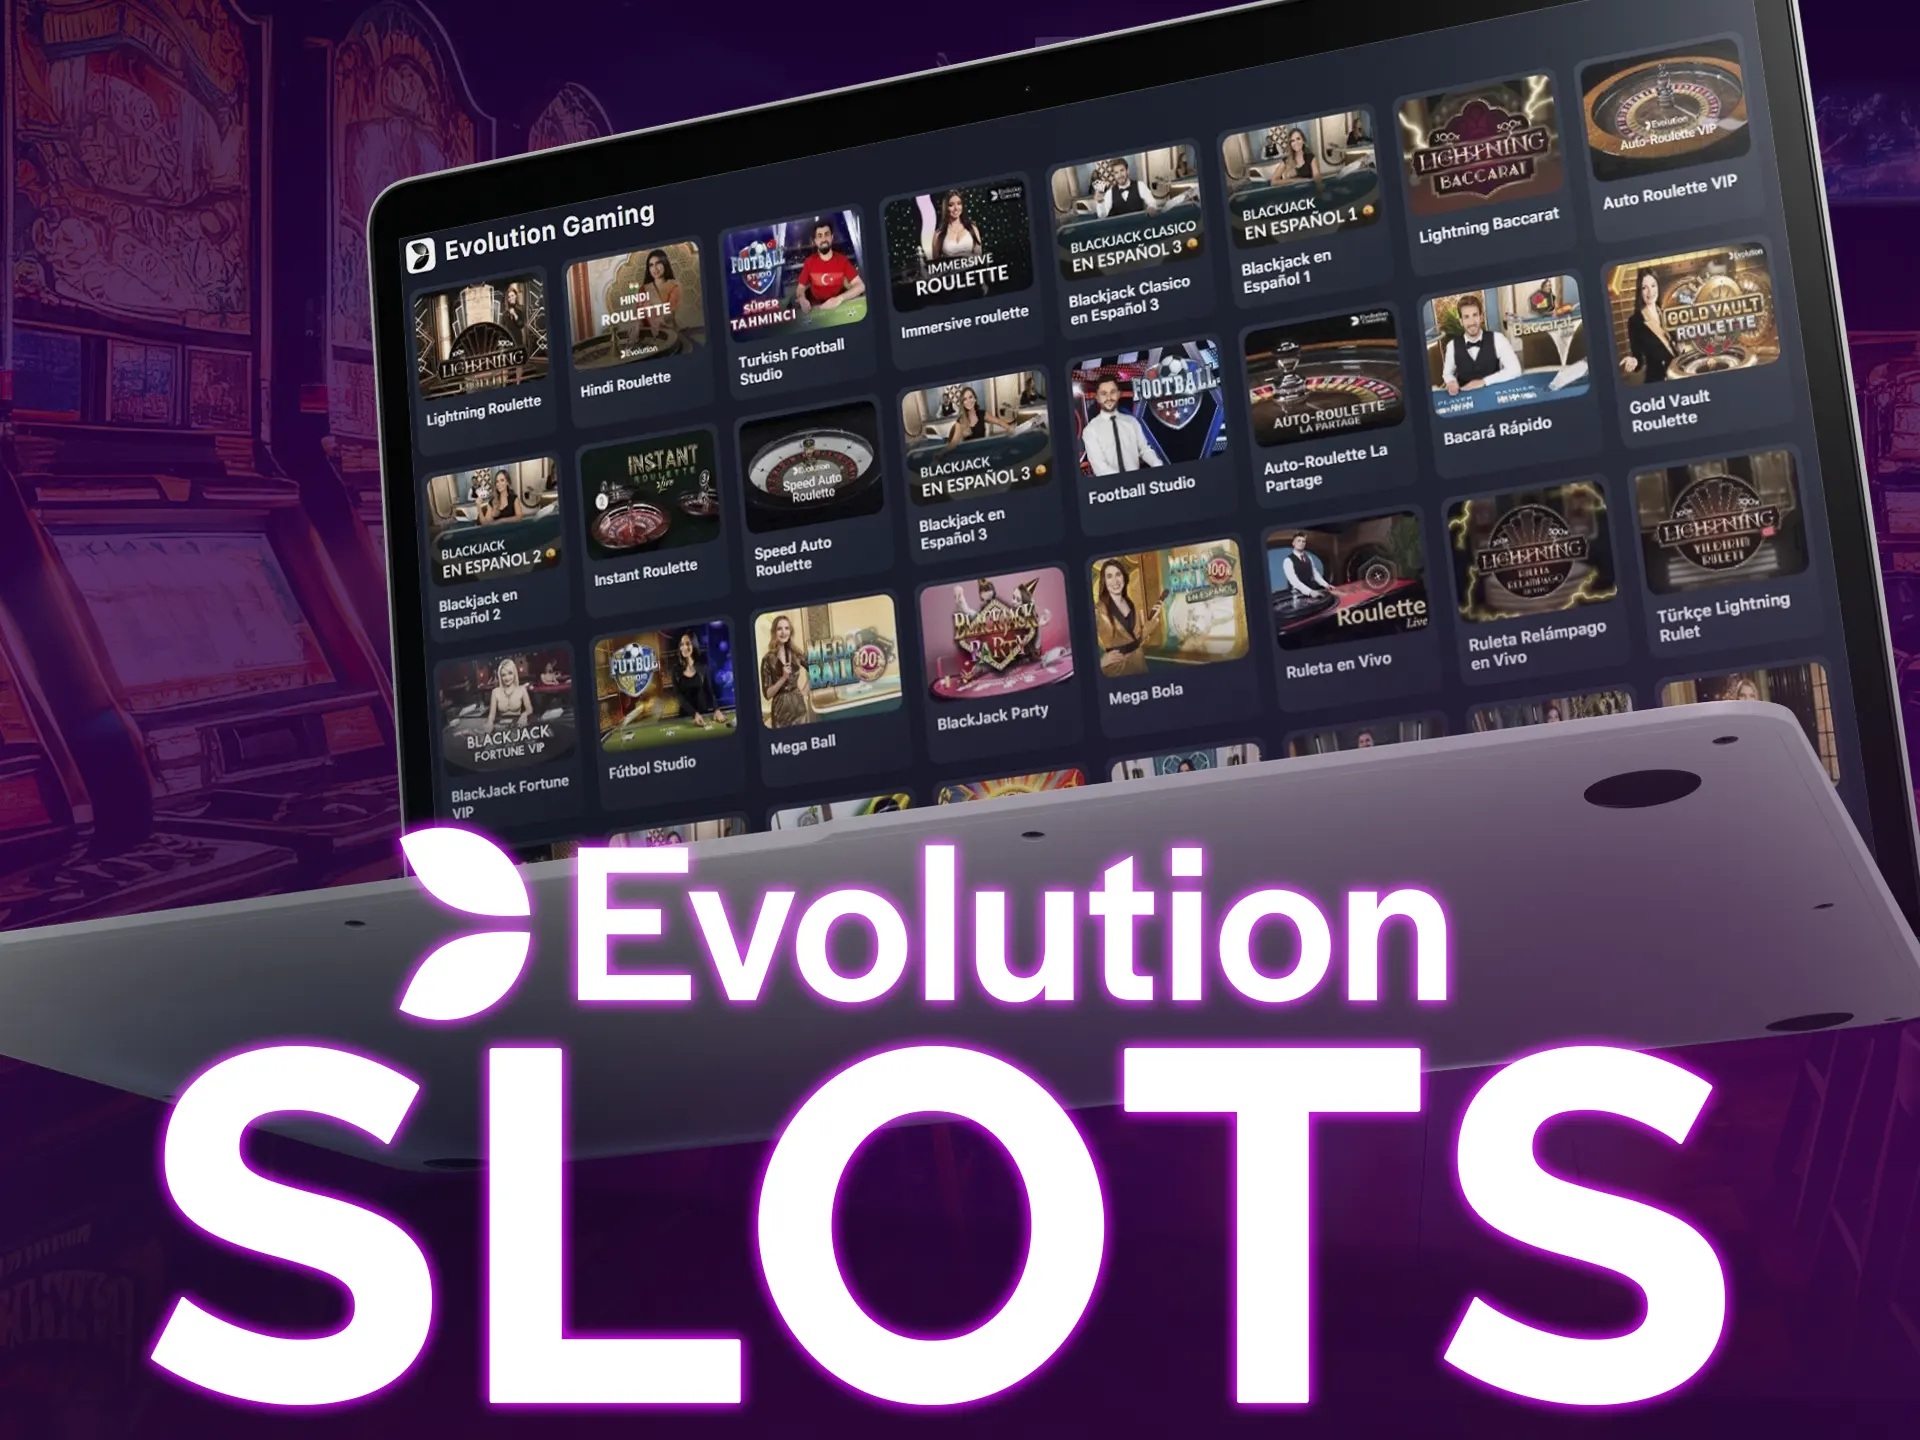 Evolution Gaming acquired NetEnt and Red Tiger Gaming, offering 700+ slots titles.